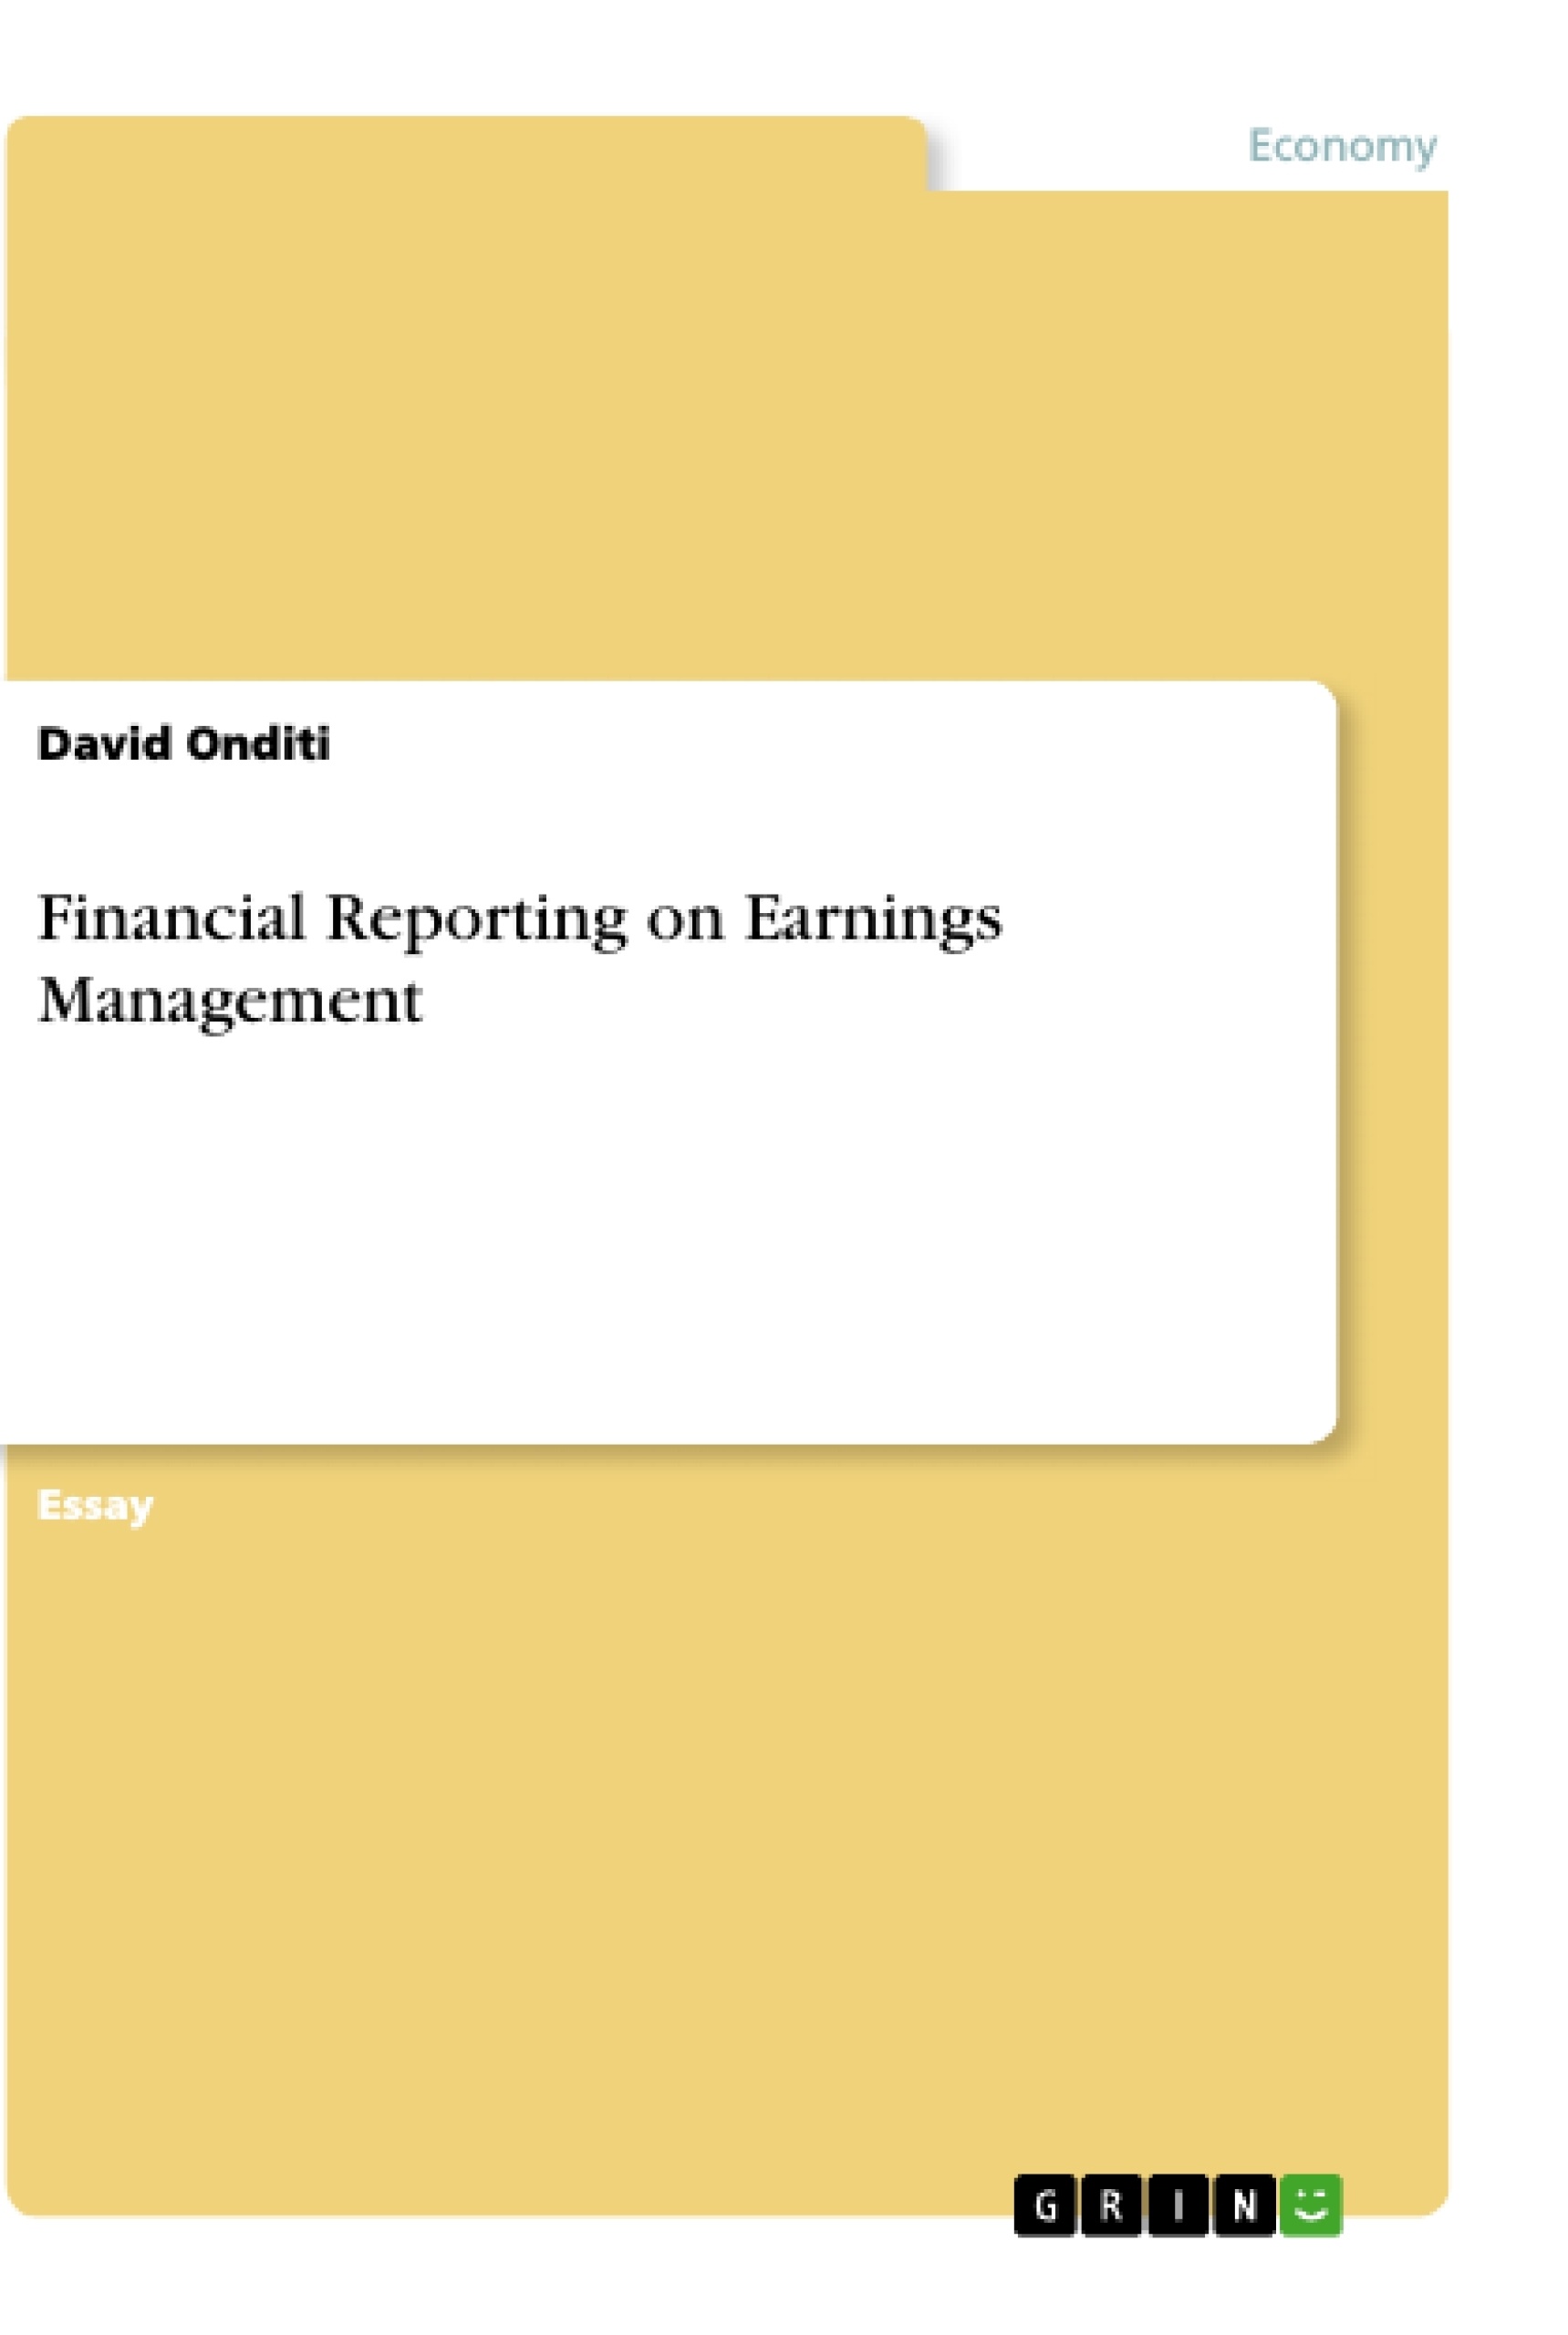 Título: Financial Reporting on Earnings Management